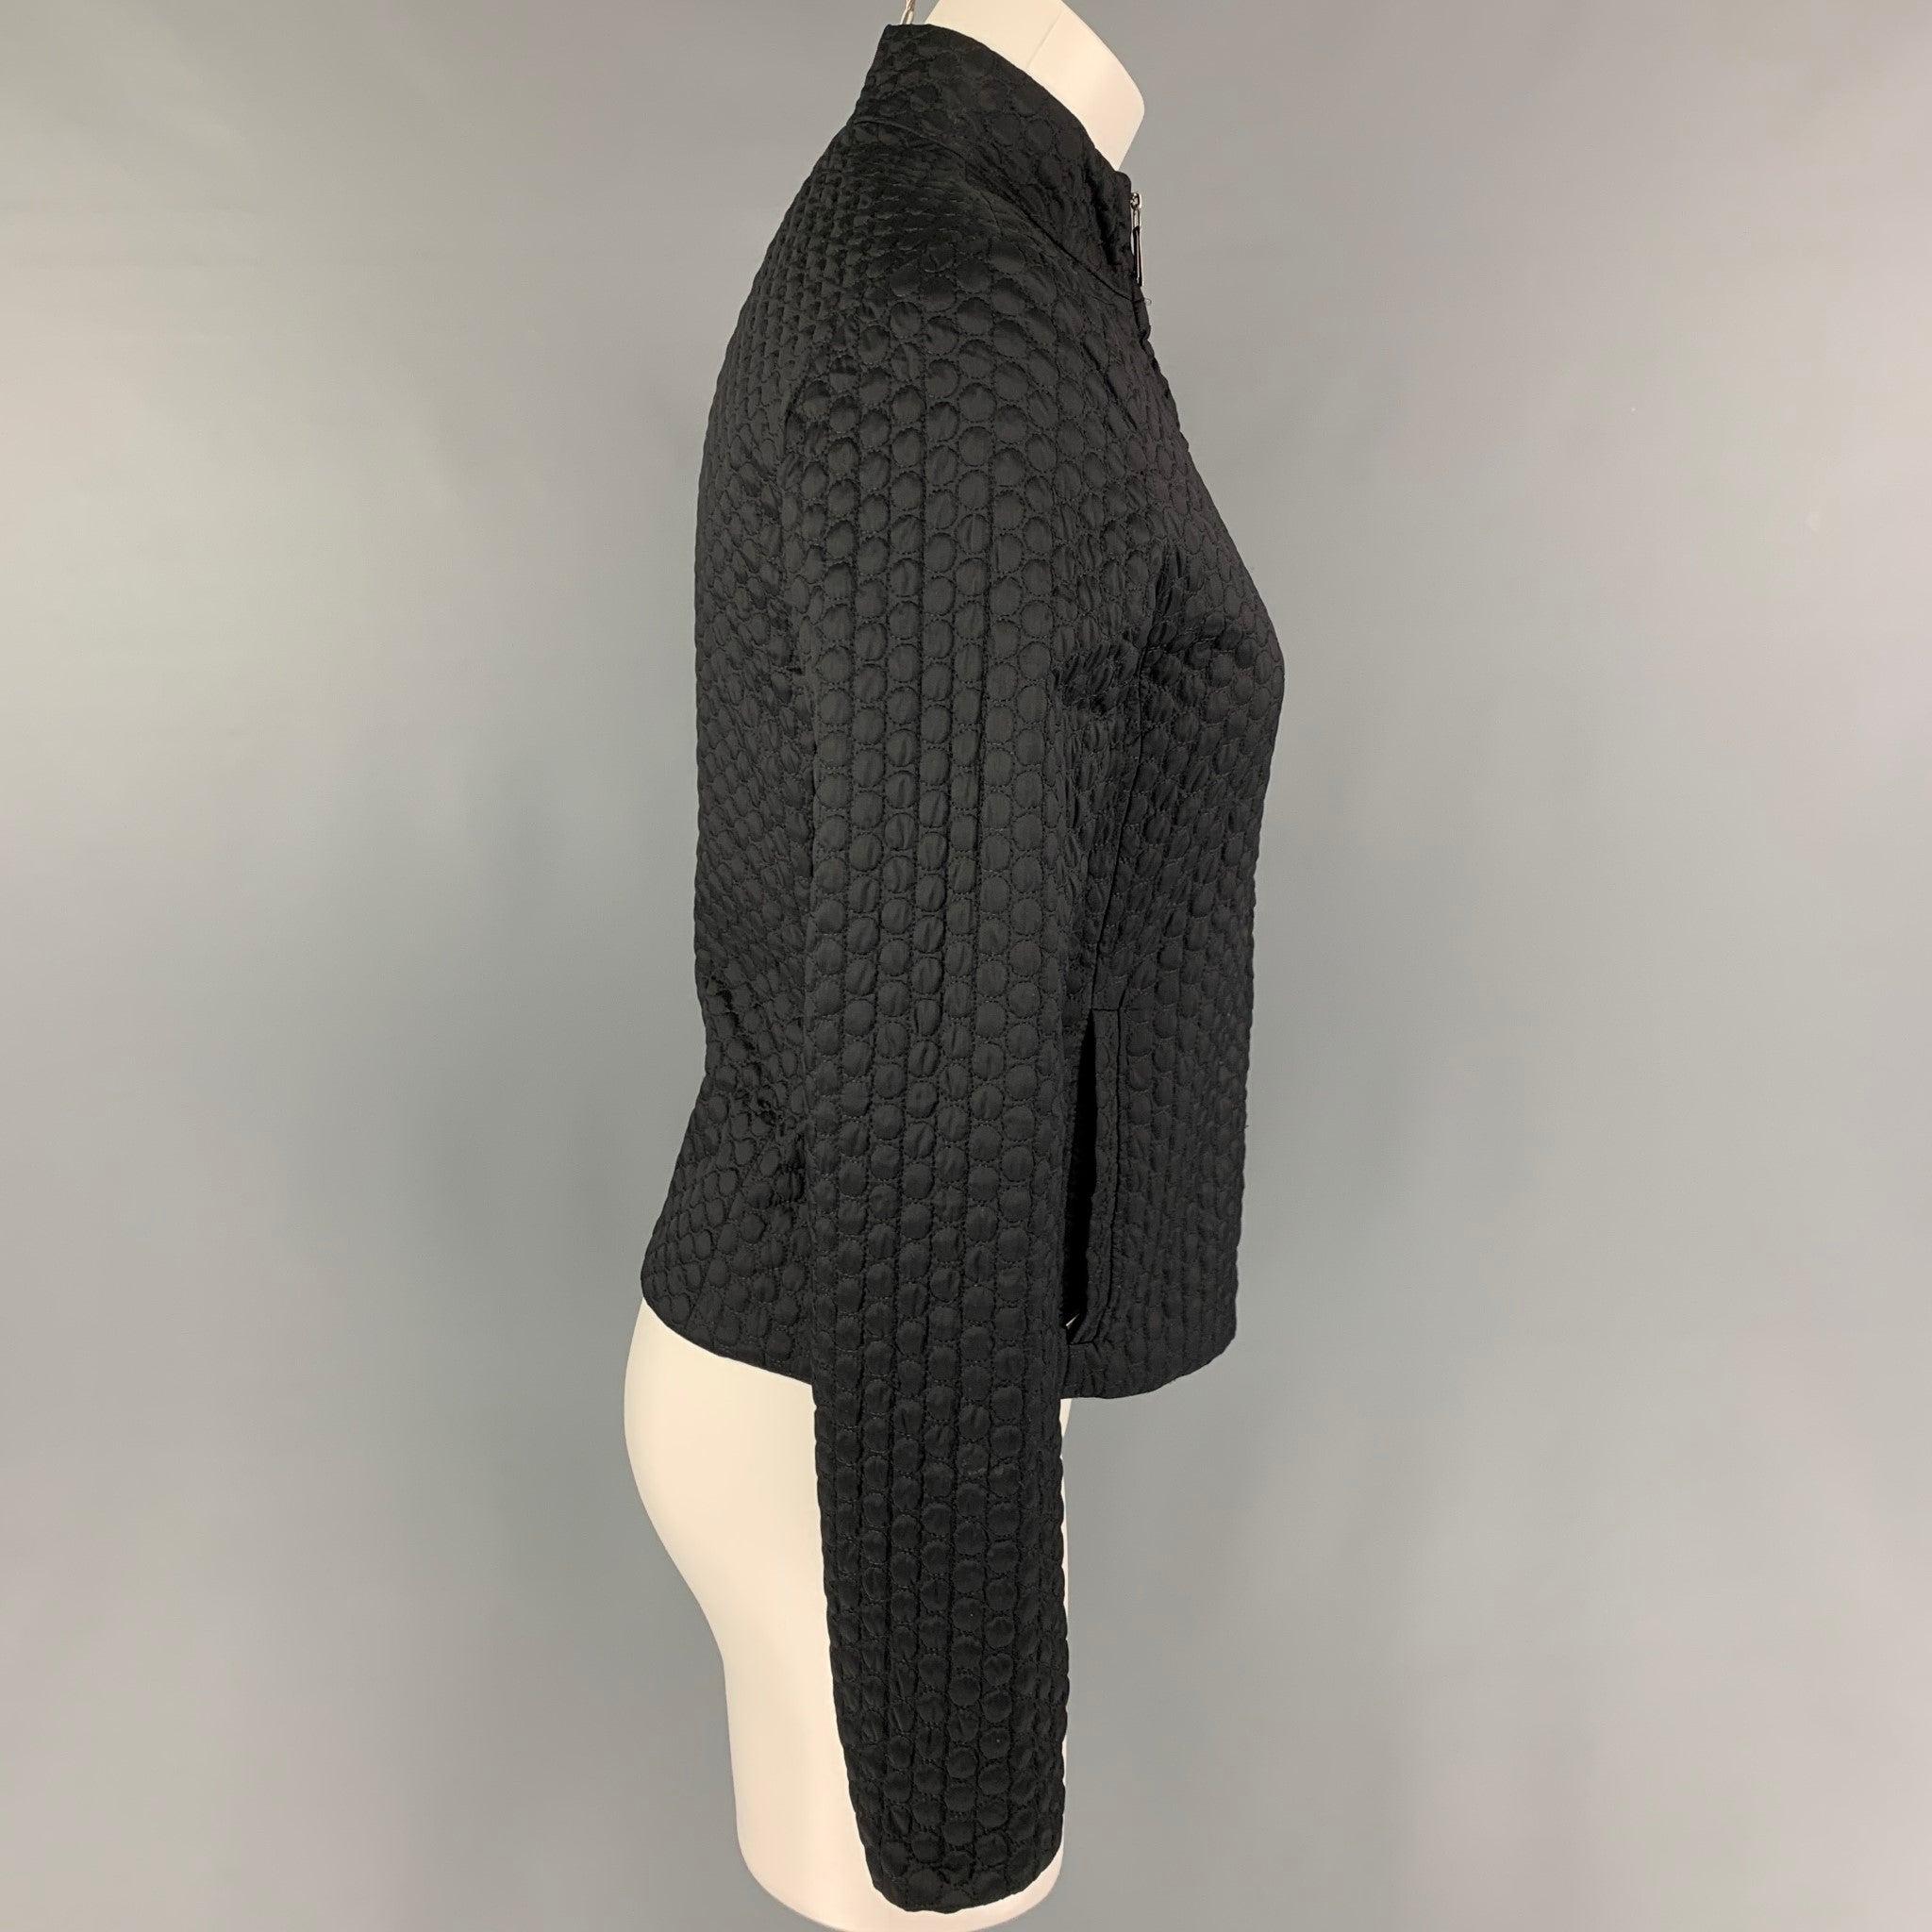 JIL SANDER jacket comes in a black textured polyester blend featuring a reversible style, high collar, slit pockets, and a full zip up closure. Made in Italy.
Very Good
Pre-Owned Condition. 

Marked:   34 

Measurements: 
 
Shoulder: 15.5 inches 